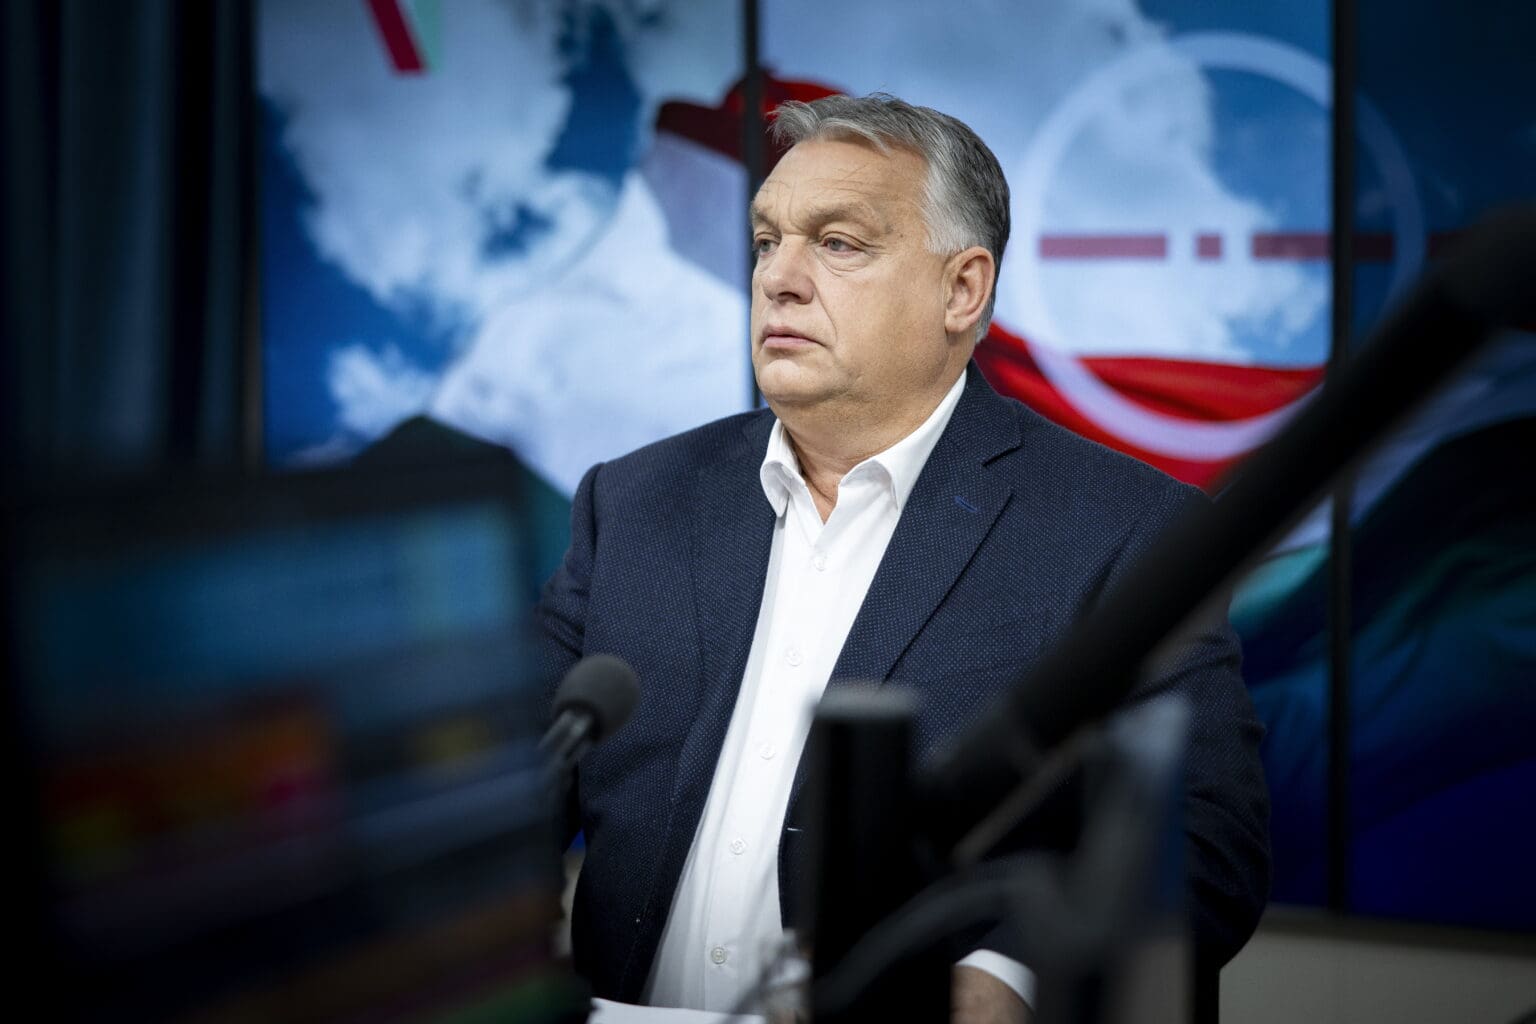 Viktor Orbán Shares Thoughts on Diplomacy, EU Funds, LGBTQ and Economic Growth